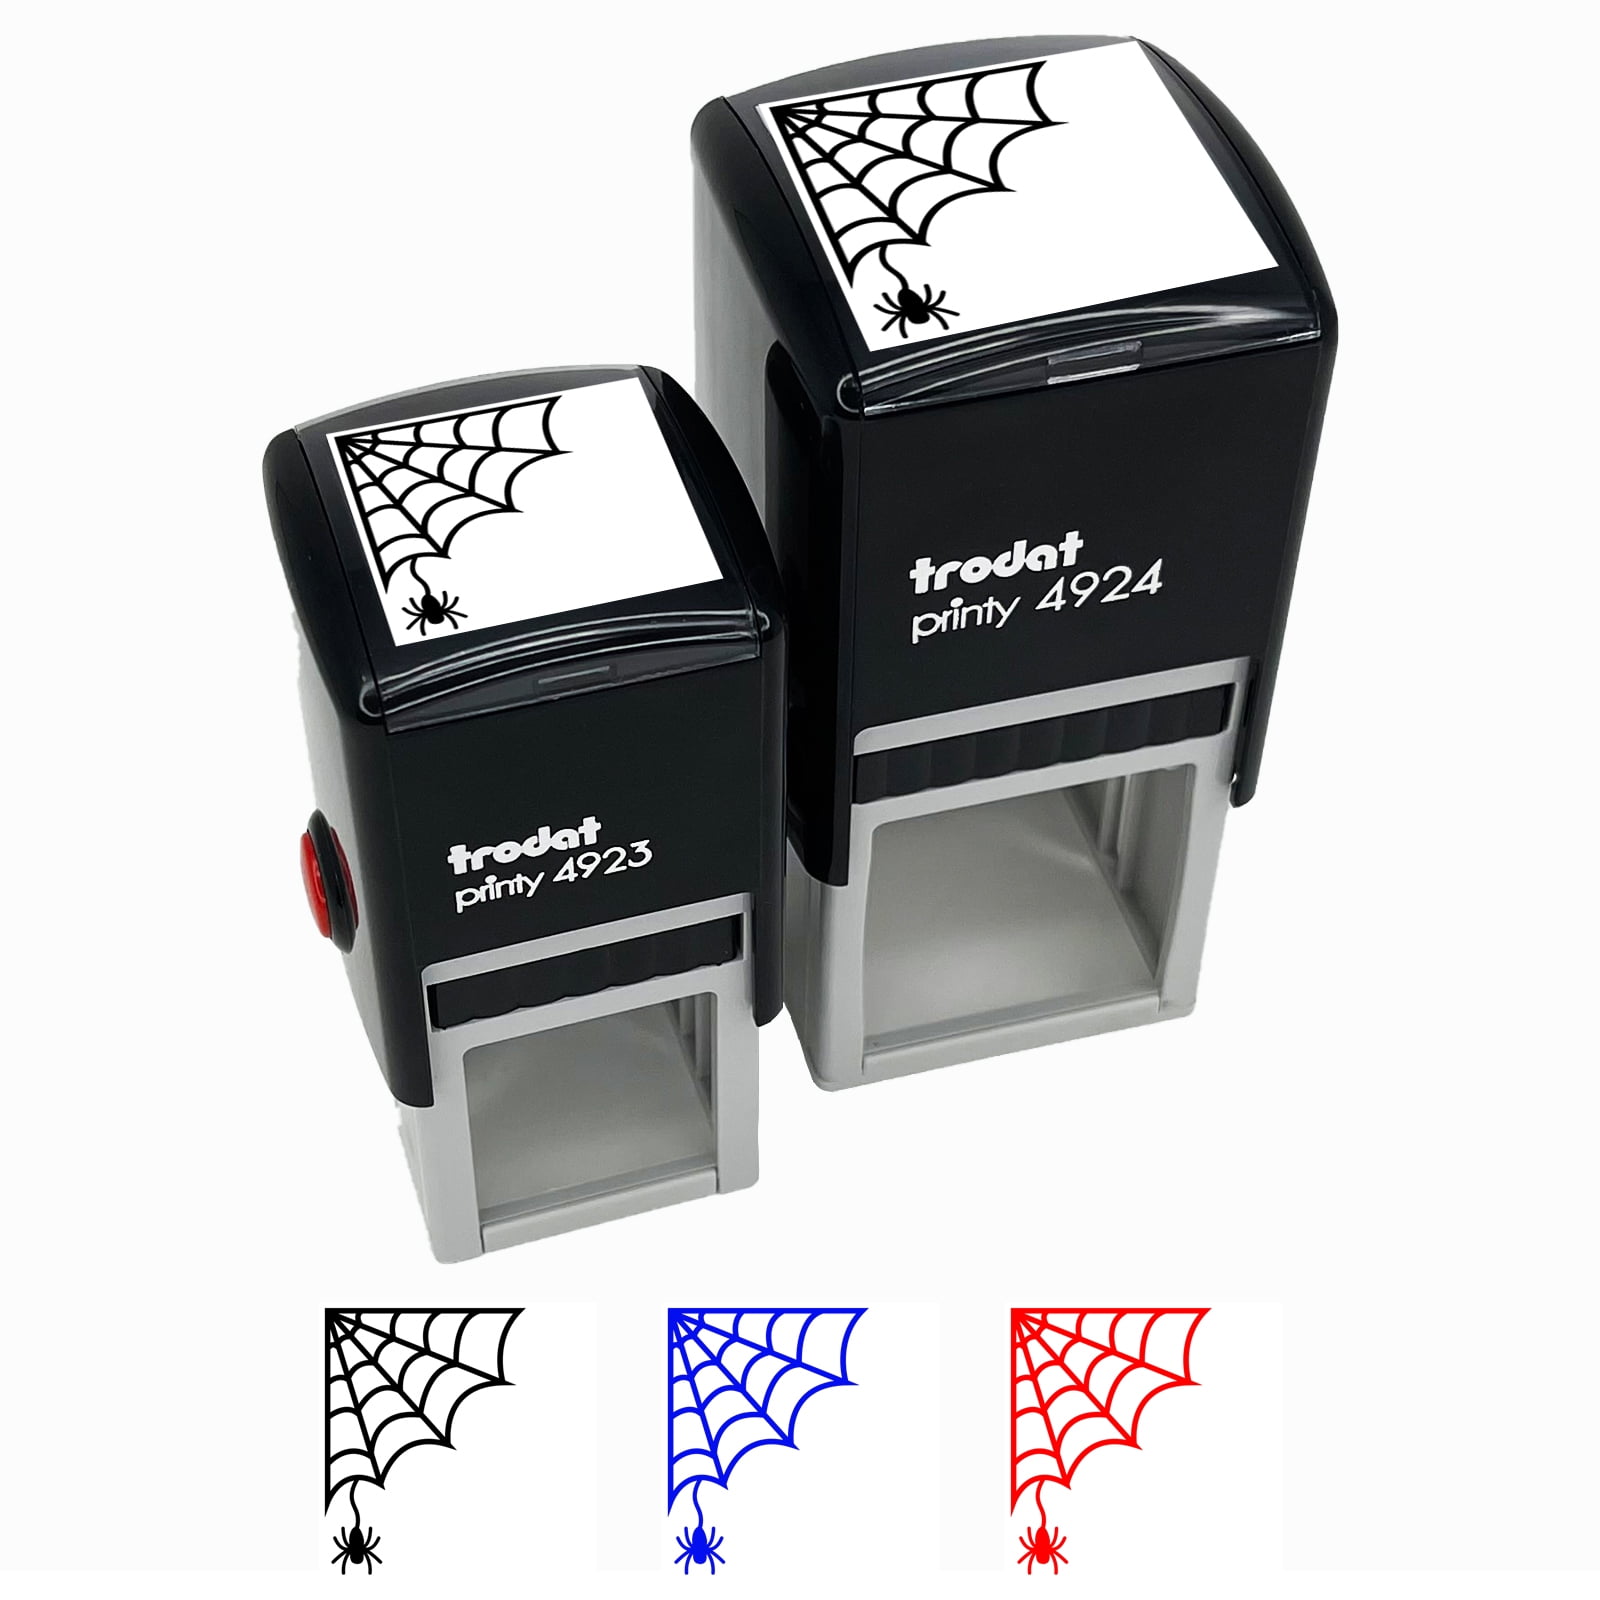 MaxMark One Line Self Inking Stamp 3/4 x 1-7/8 Customize Online Many Font and Color Choices 